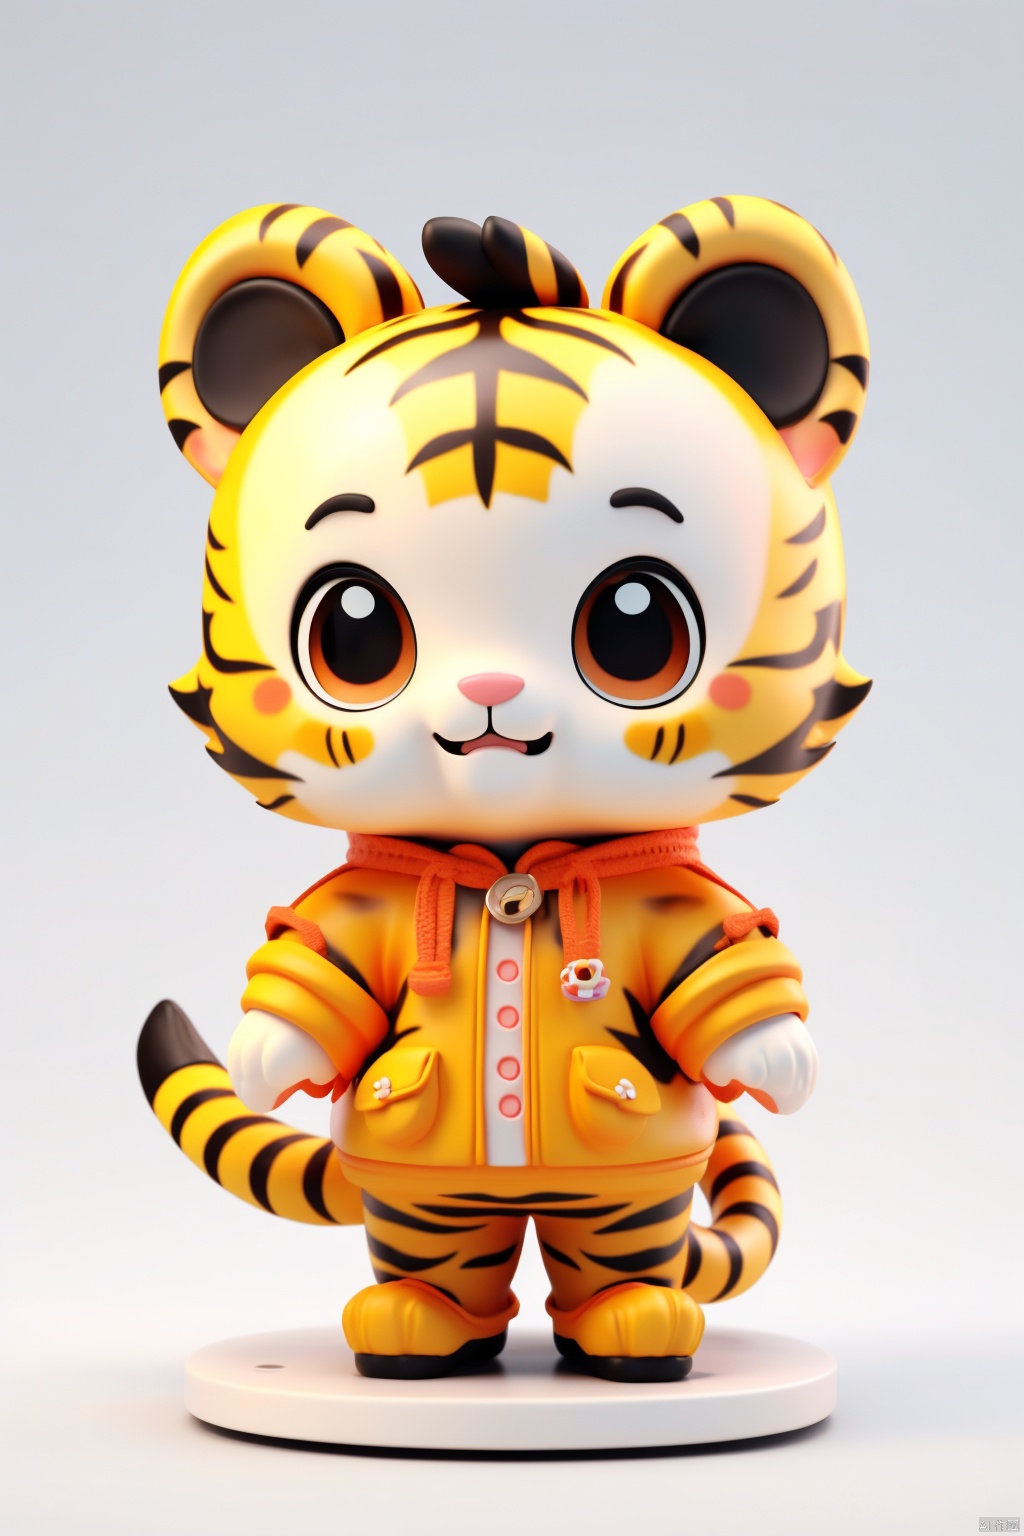  masterpiece, best quality,little tiger,big eyes,wear gogerous clothes,super cute,paopaoma,blindbox,white background